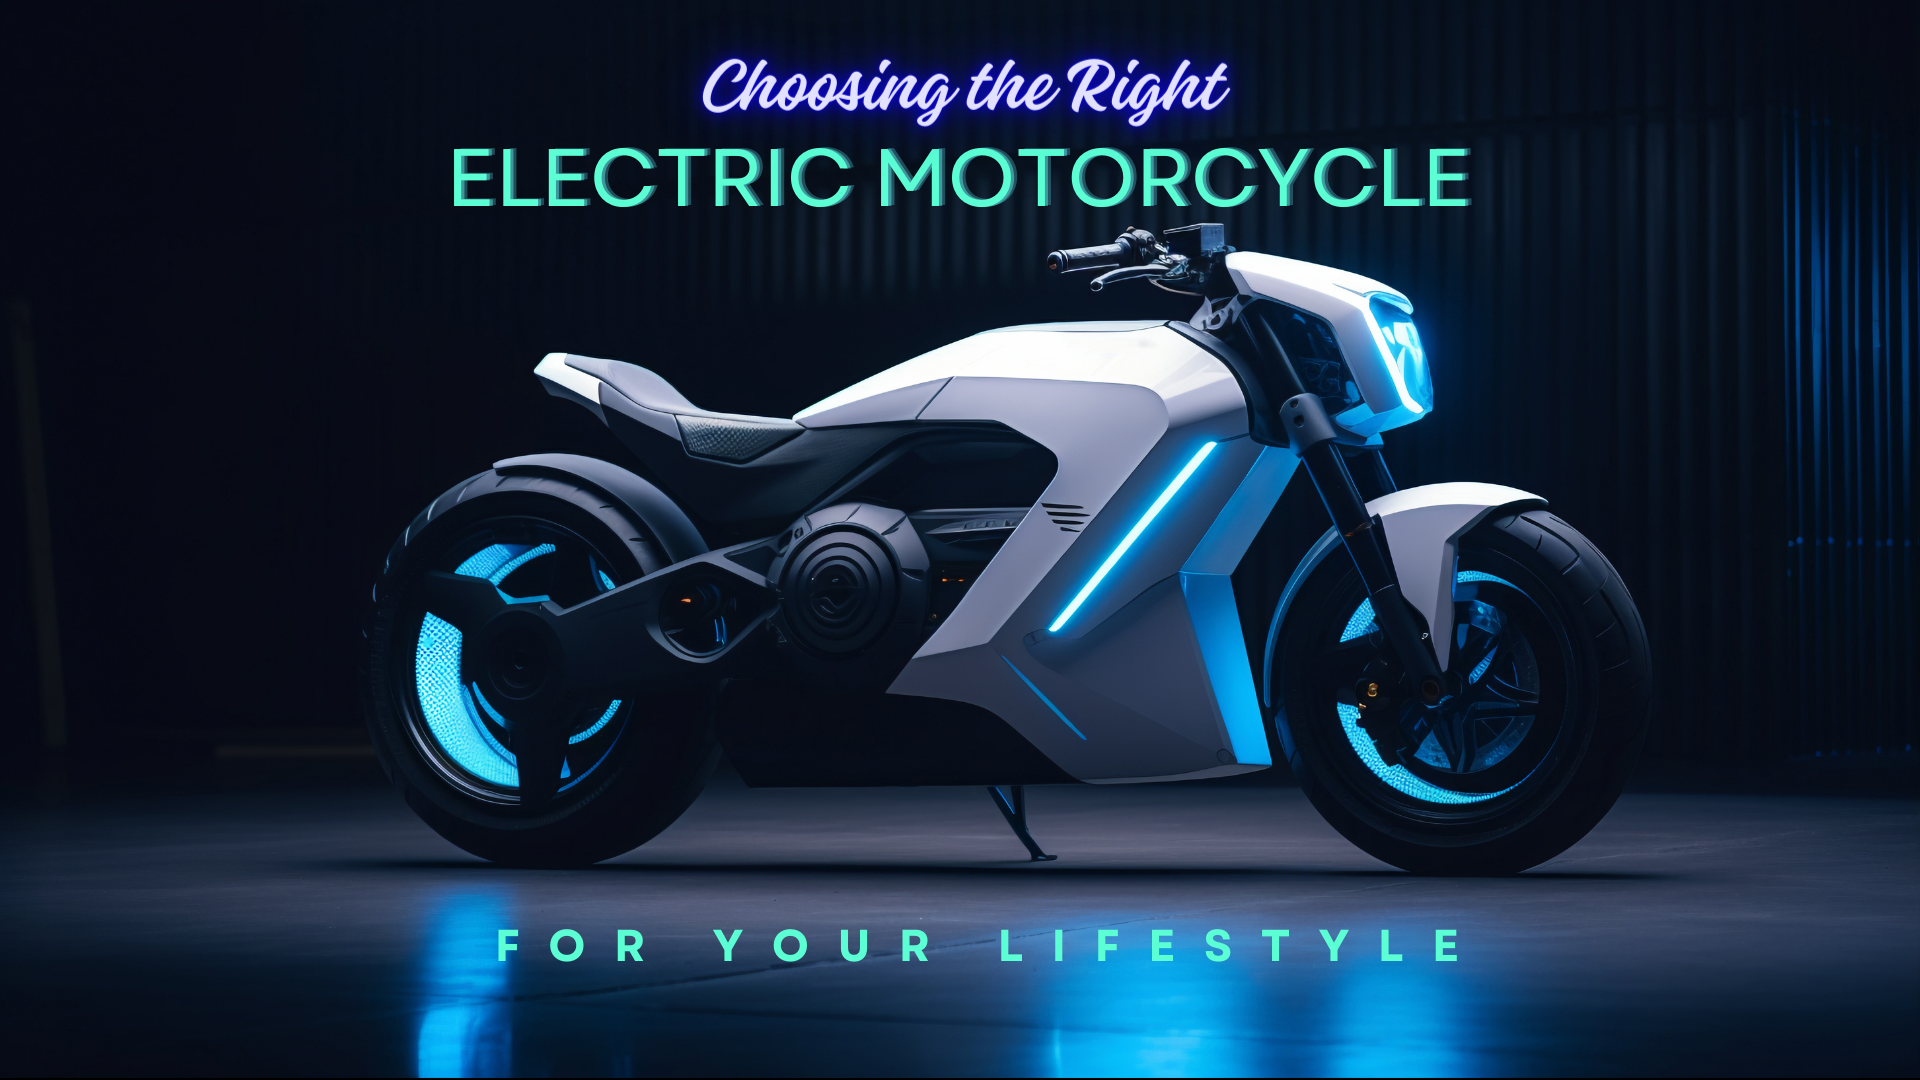 How to Choose the Right Bike for Your Electric Motorcycle Lifestyle